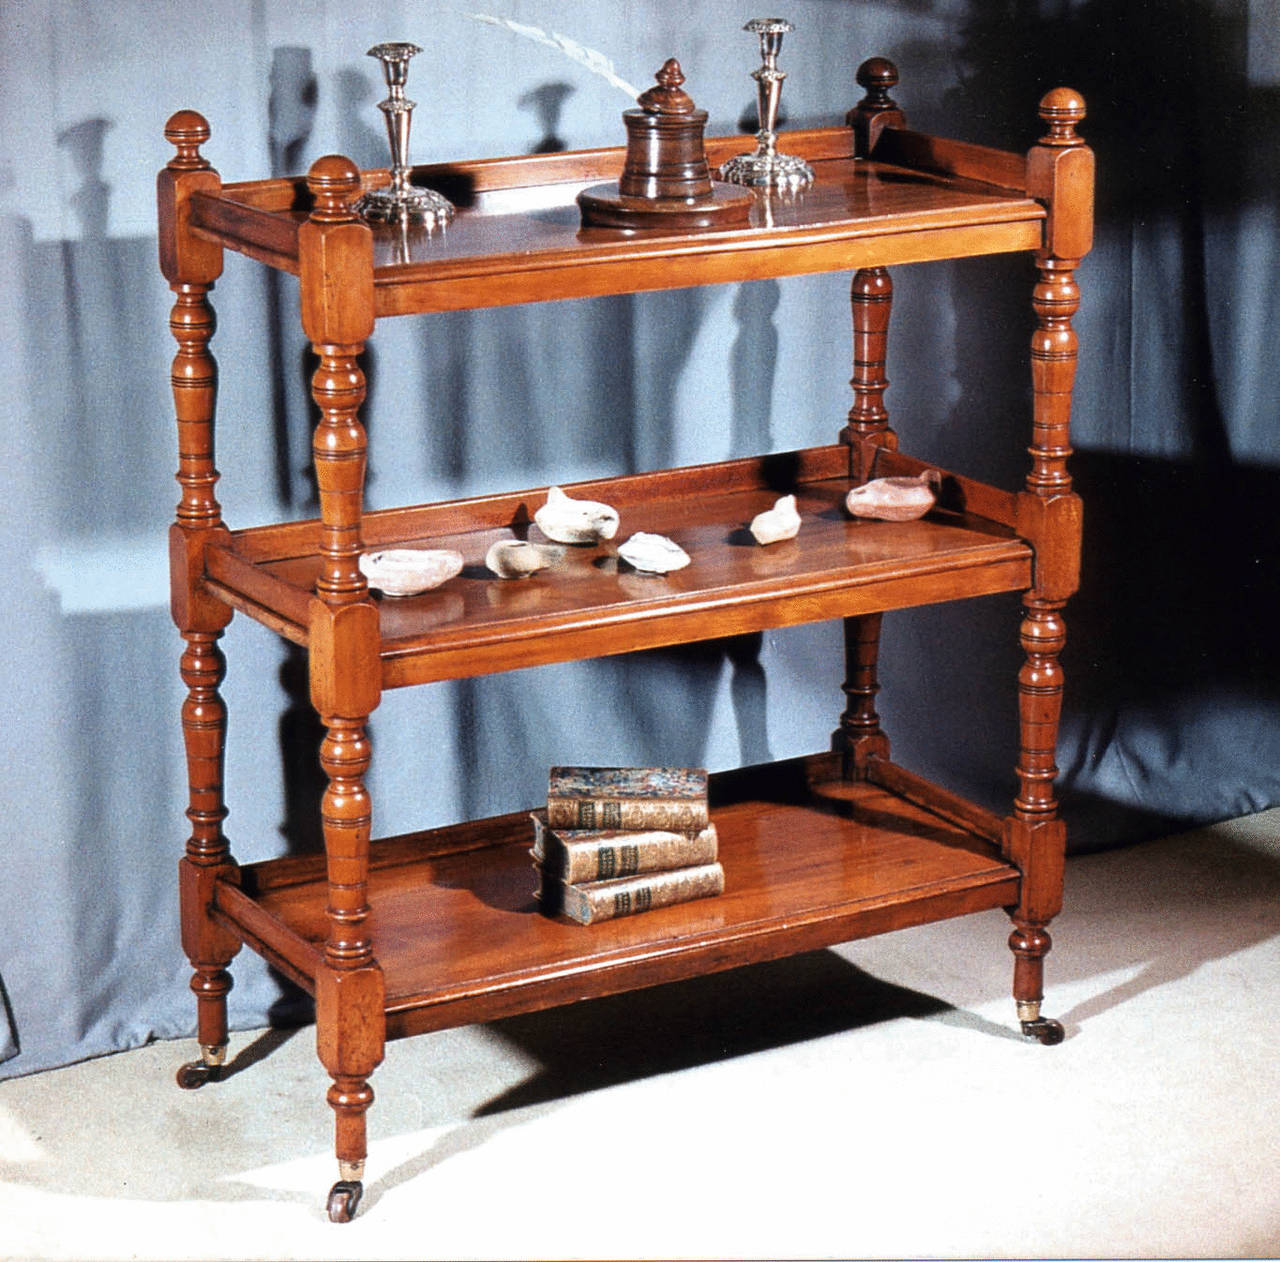 A William IV period turned walnut etagere, the three galleried shelves with turned supports and terminating in brass cups and casters.